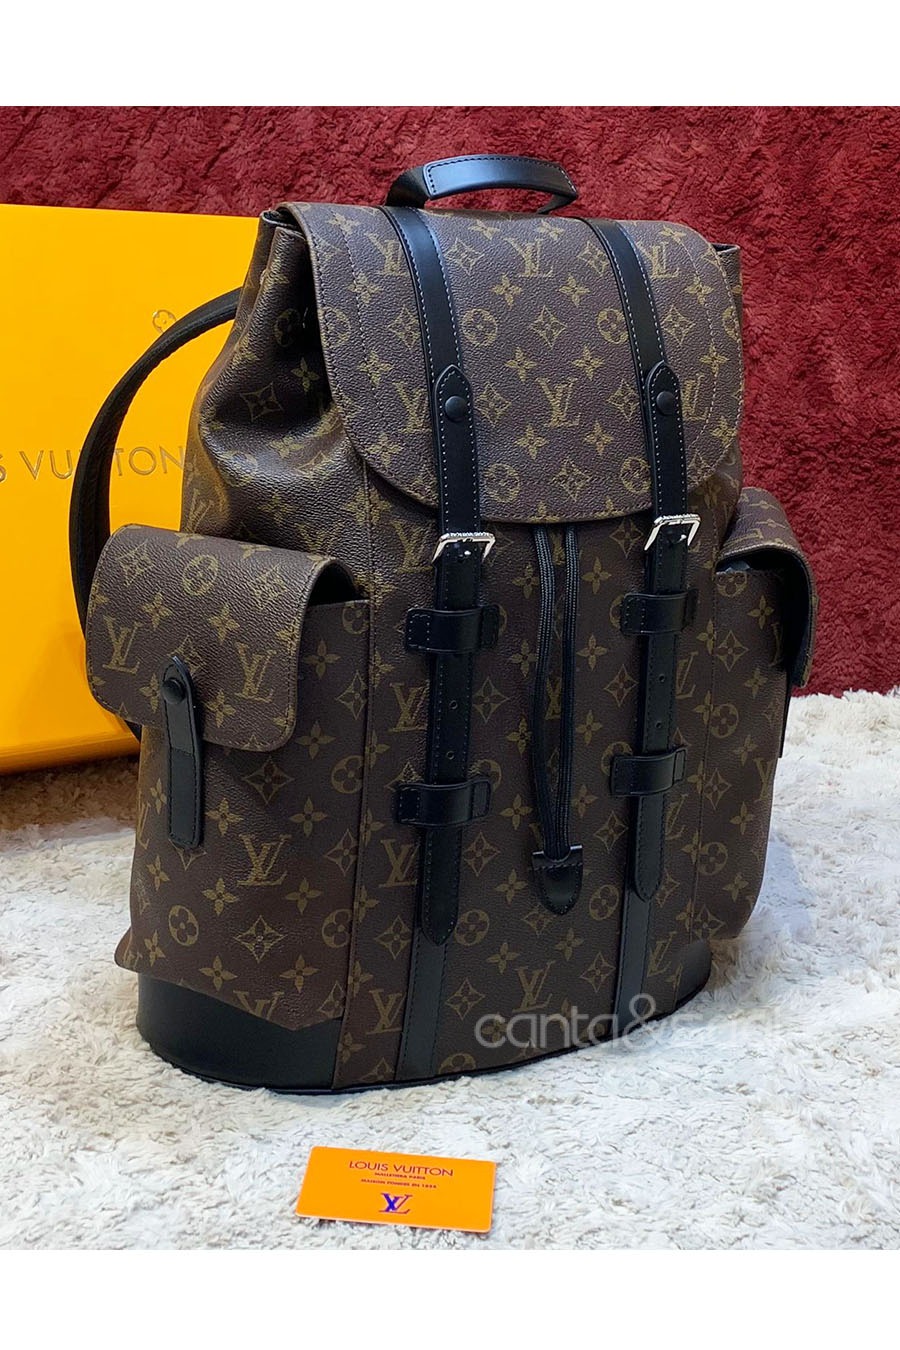 Louis Vuitton Christopher backpack 